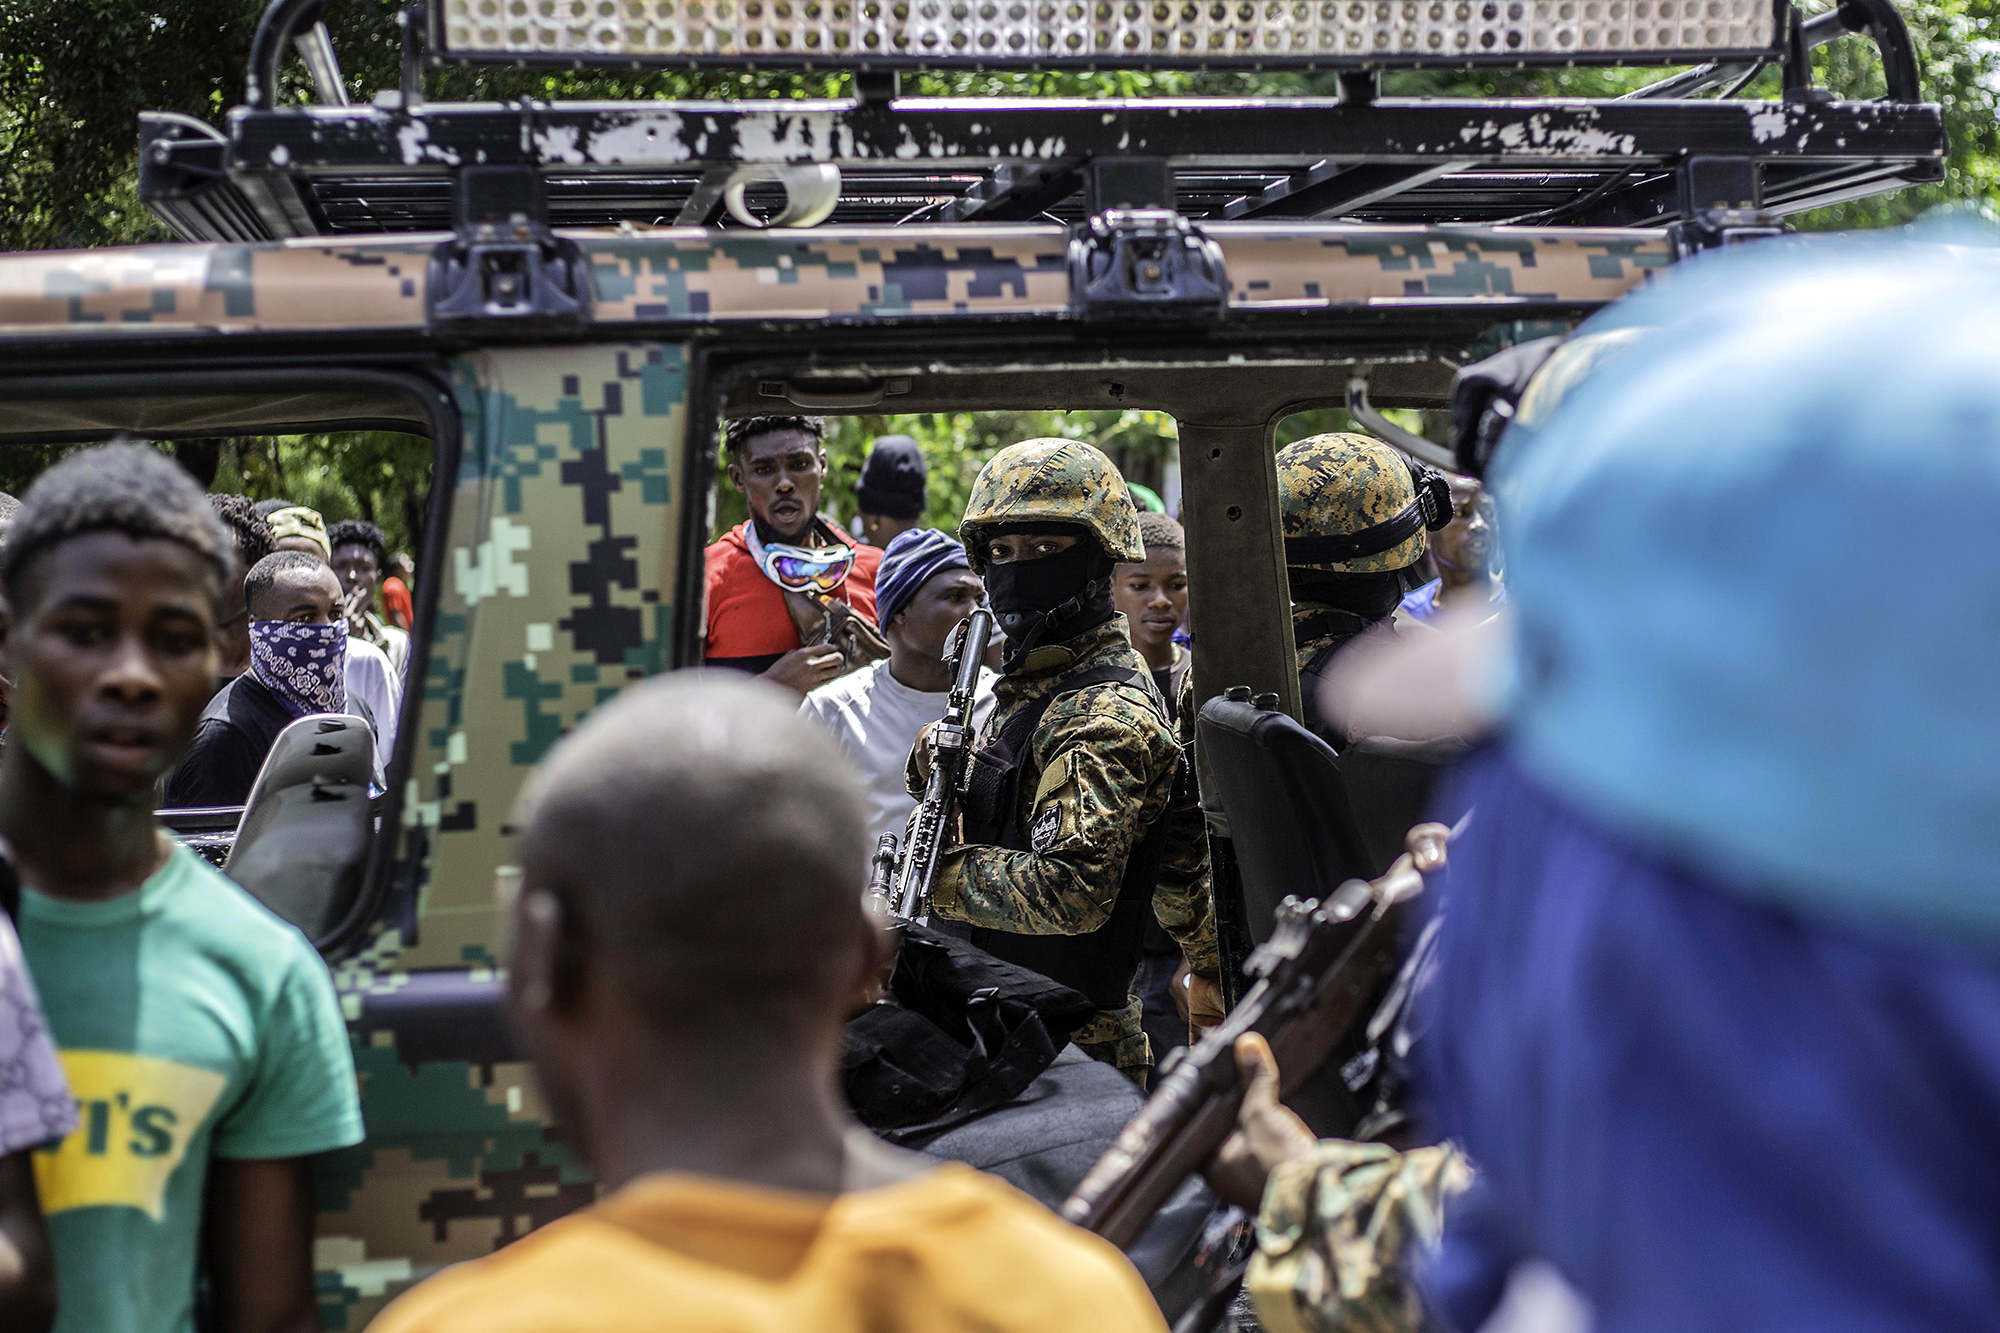 A soldier sits in a military vehicle while looking at civilians that surround the car.